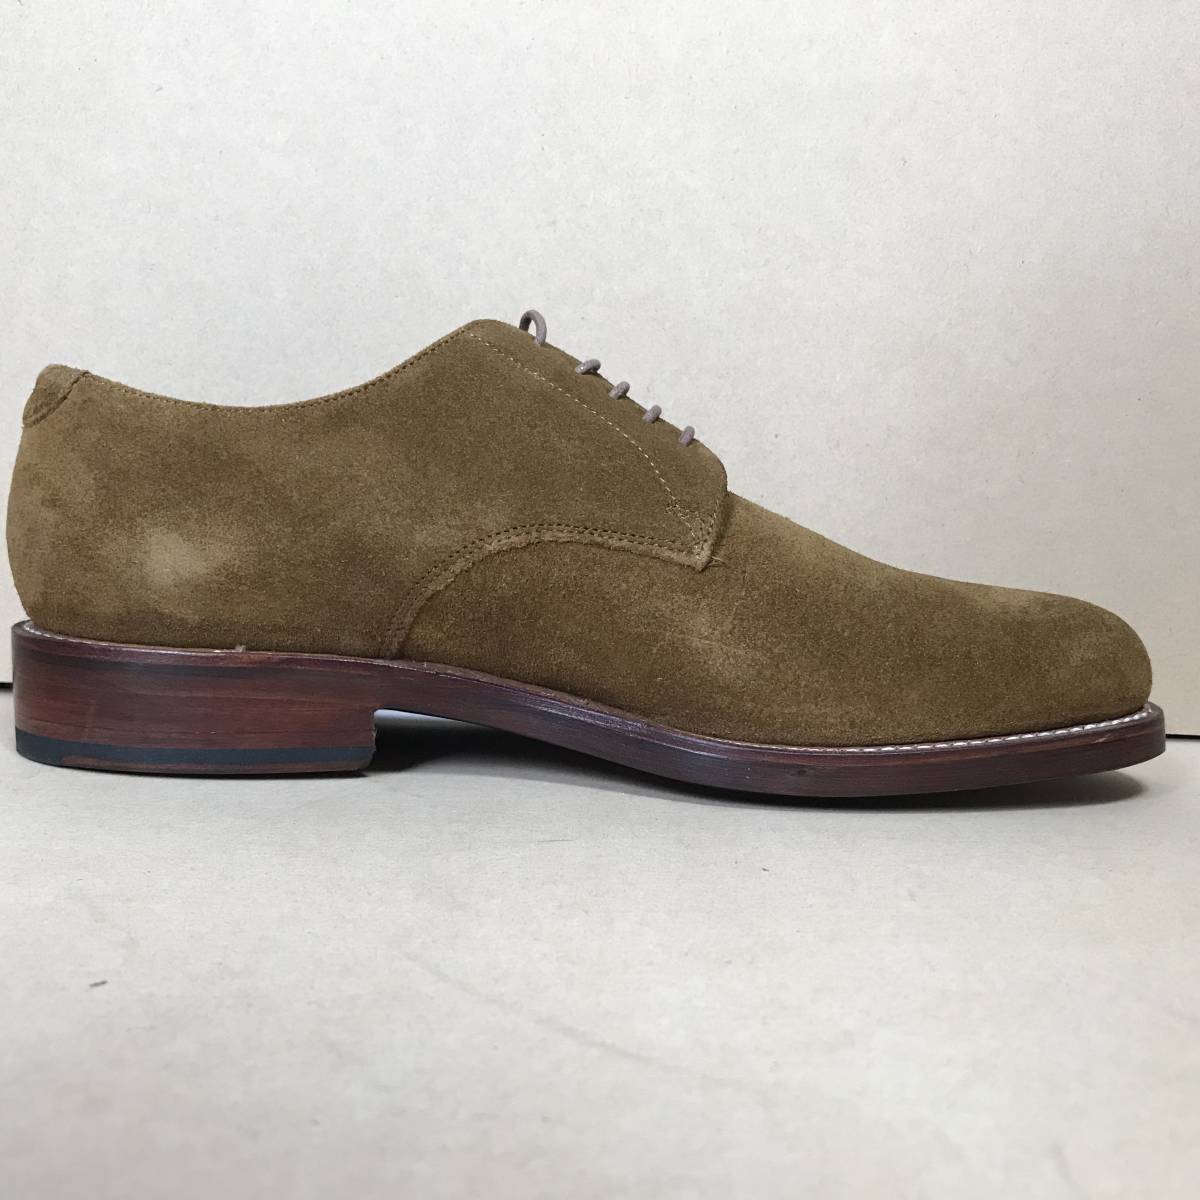  Glenn son(Grenson)G-TWO leather shoes CURTIS UK7.5